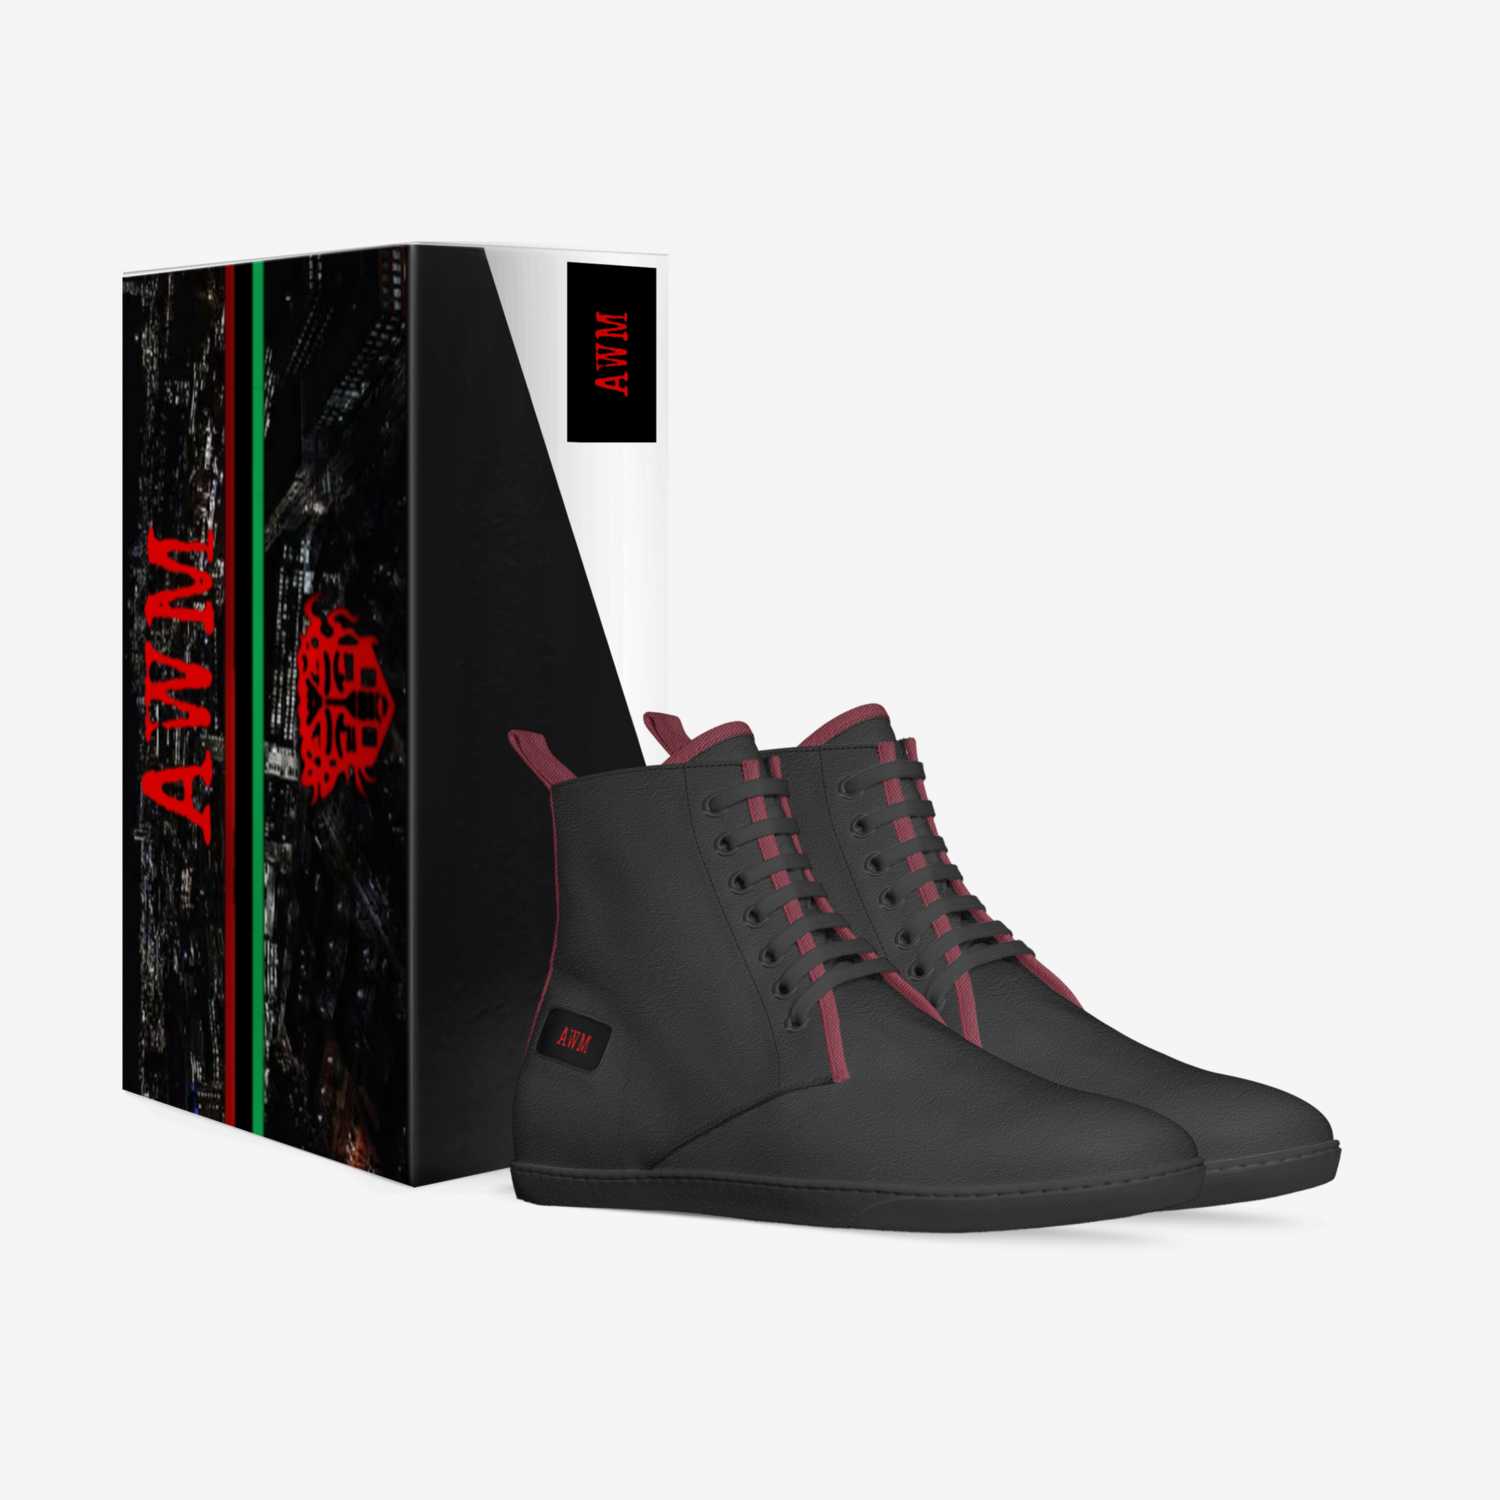 AWM  custom made in Italy shoes by African War Mask | Box view